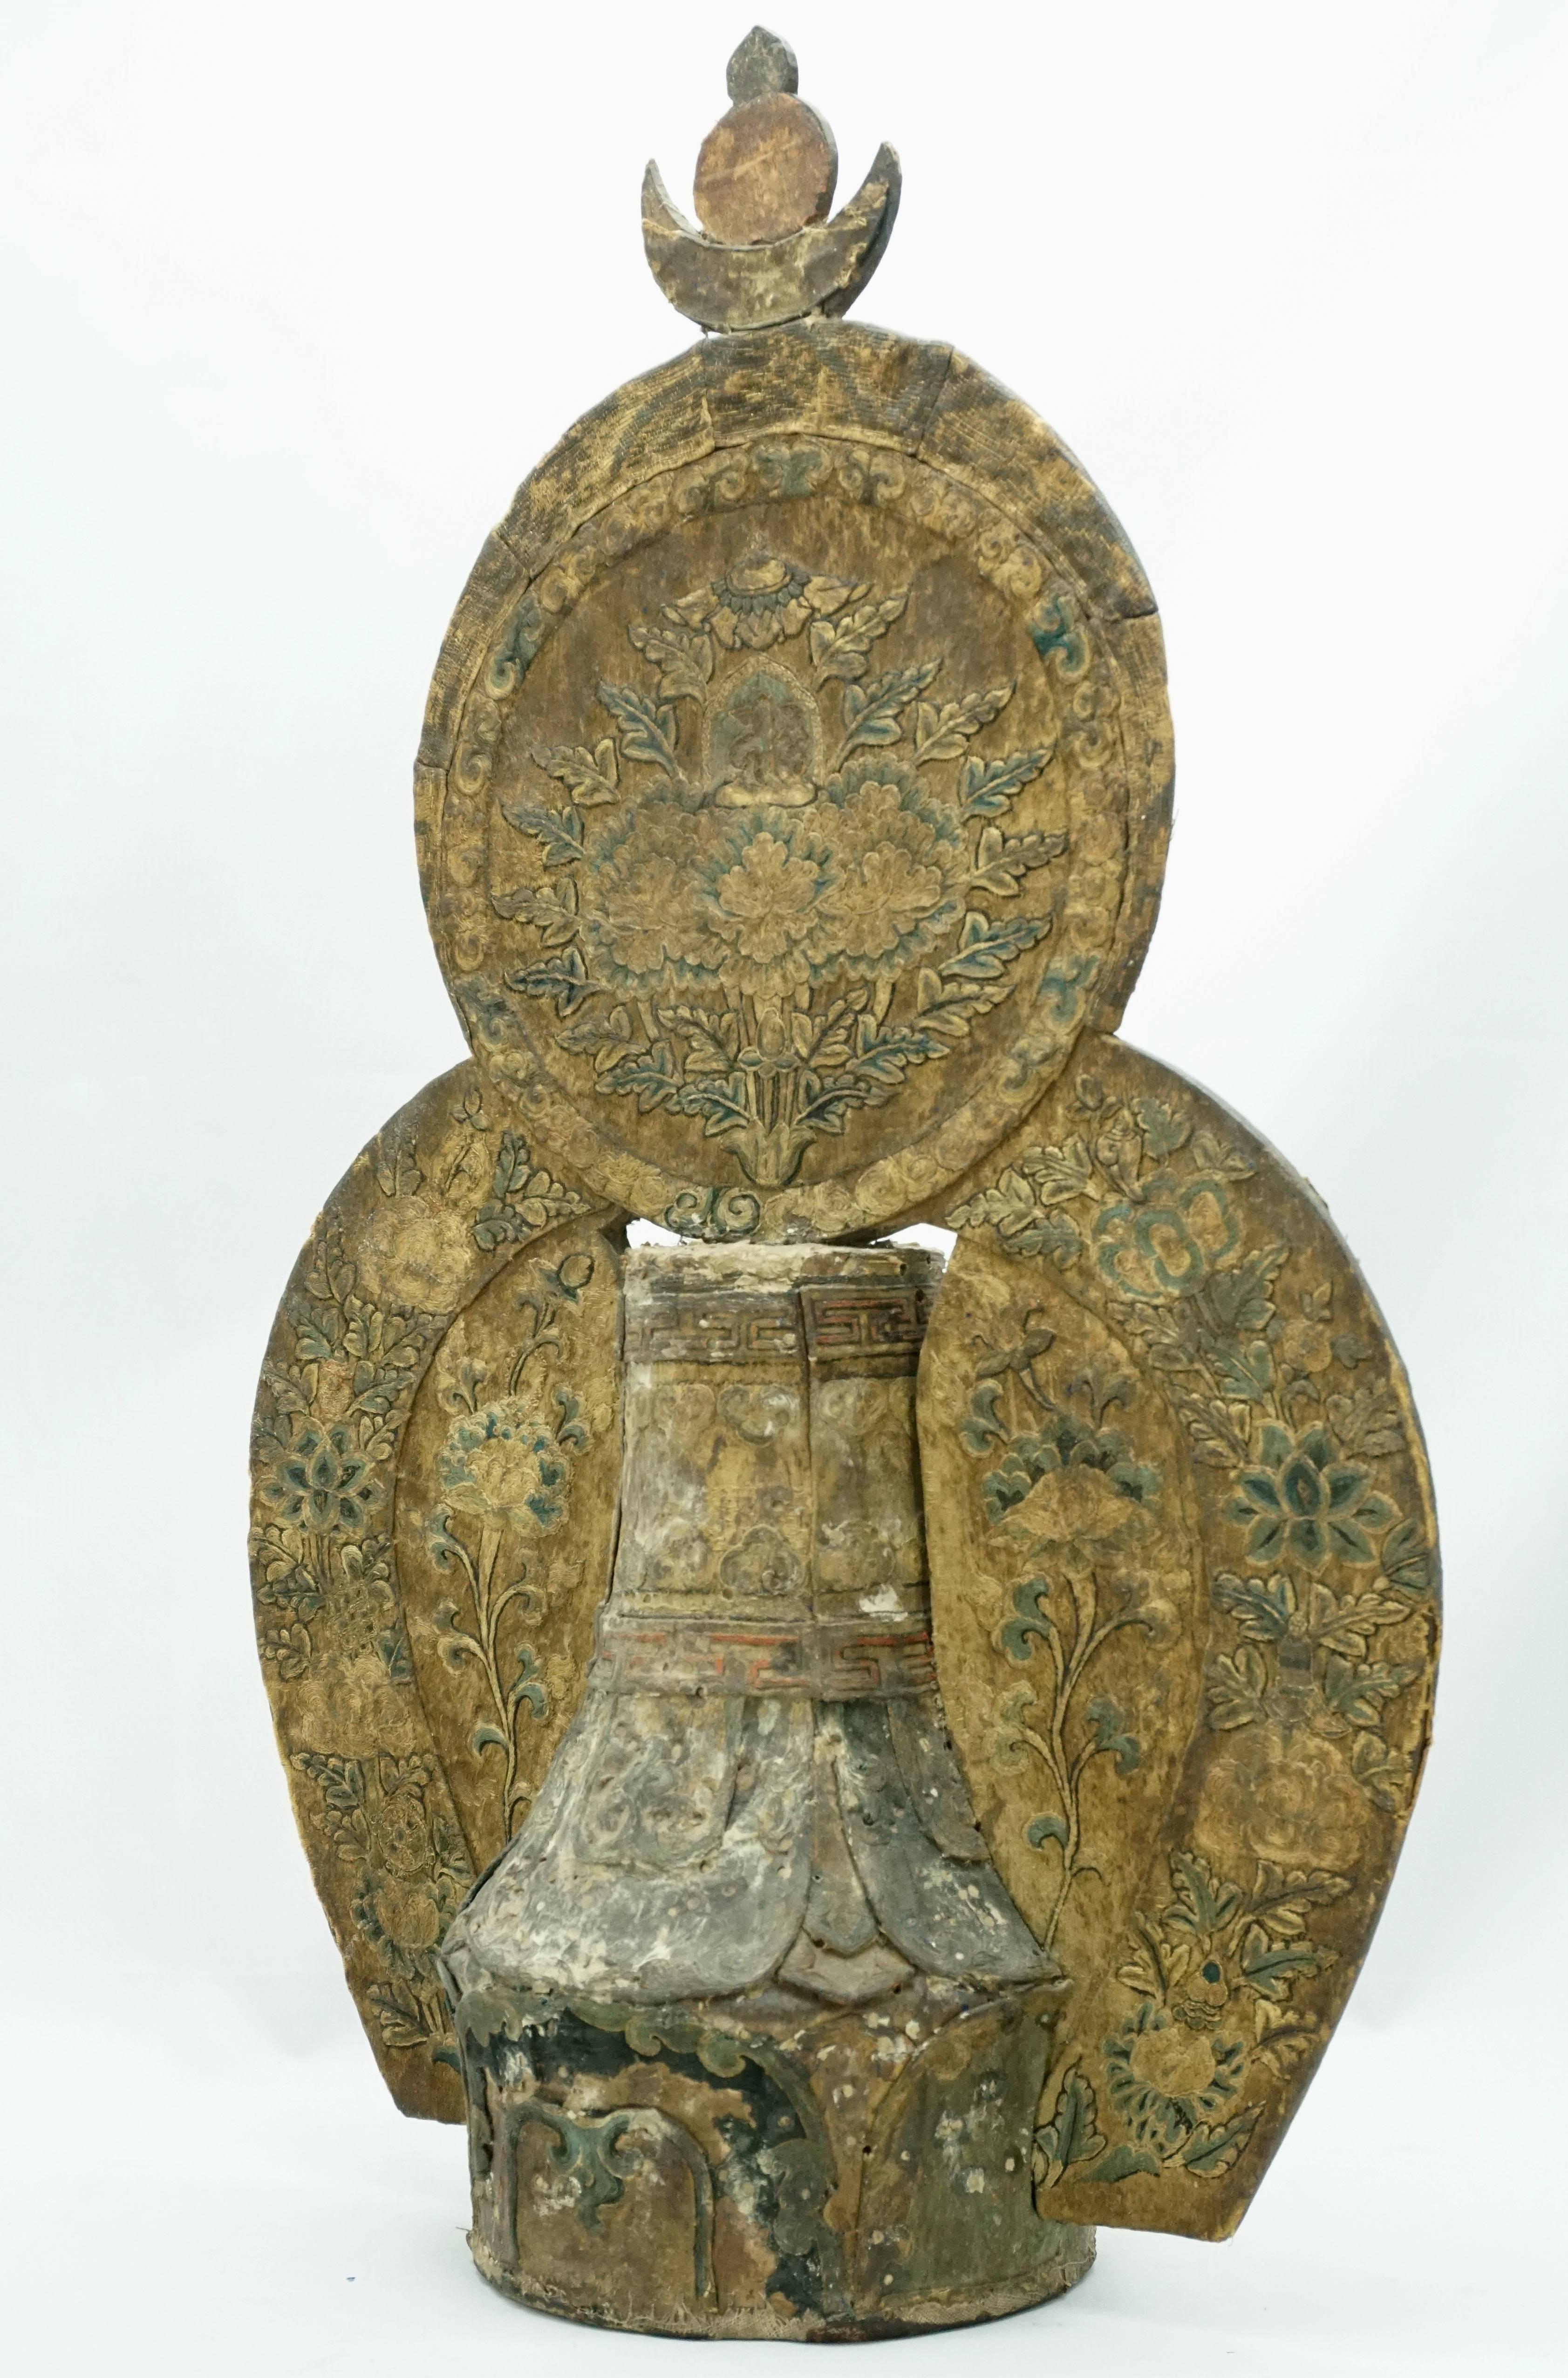 Tibetan priest's crown top Buddha Stupa in carved wood with embroidered silk appliques, surmounted by a flaming crescent moon, sun and jewel symbol. This would represent Buddha statue, his seven realms, the elements and sit on the alter in a